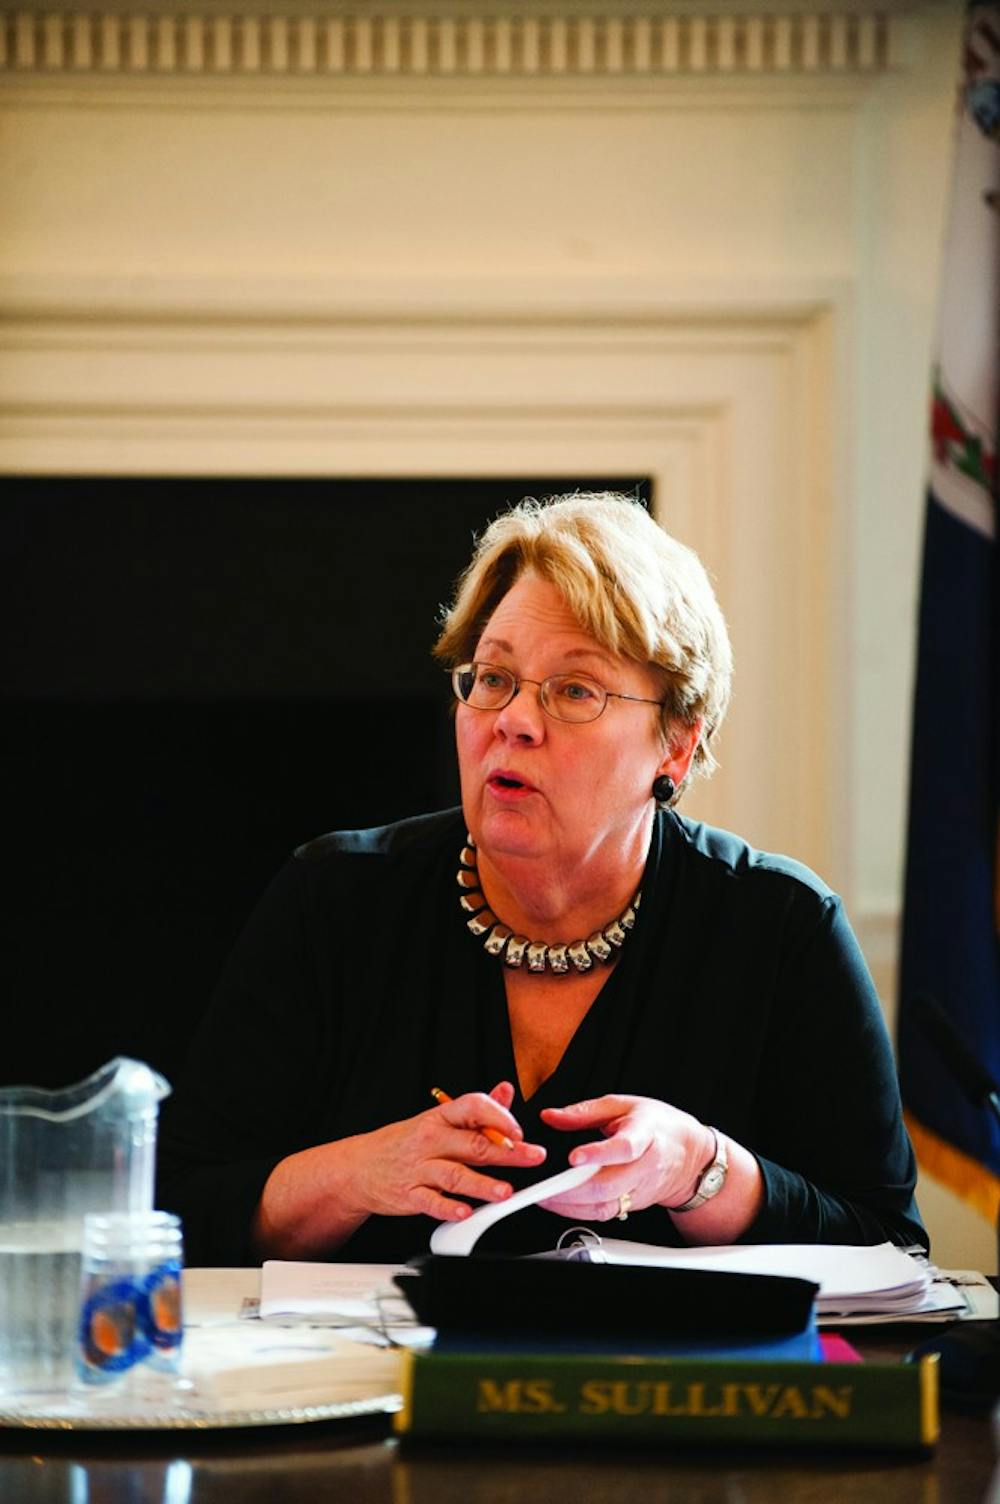 <p>Walsh said she hopes Sullivan’s position as the first female president of the University inspires faculty and students to see women as leaders.</p>